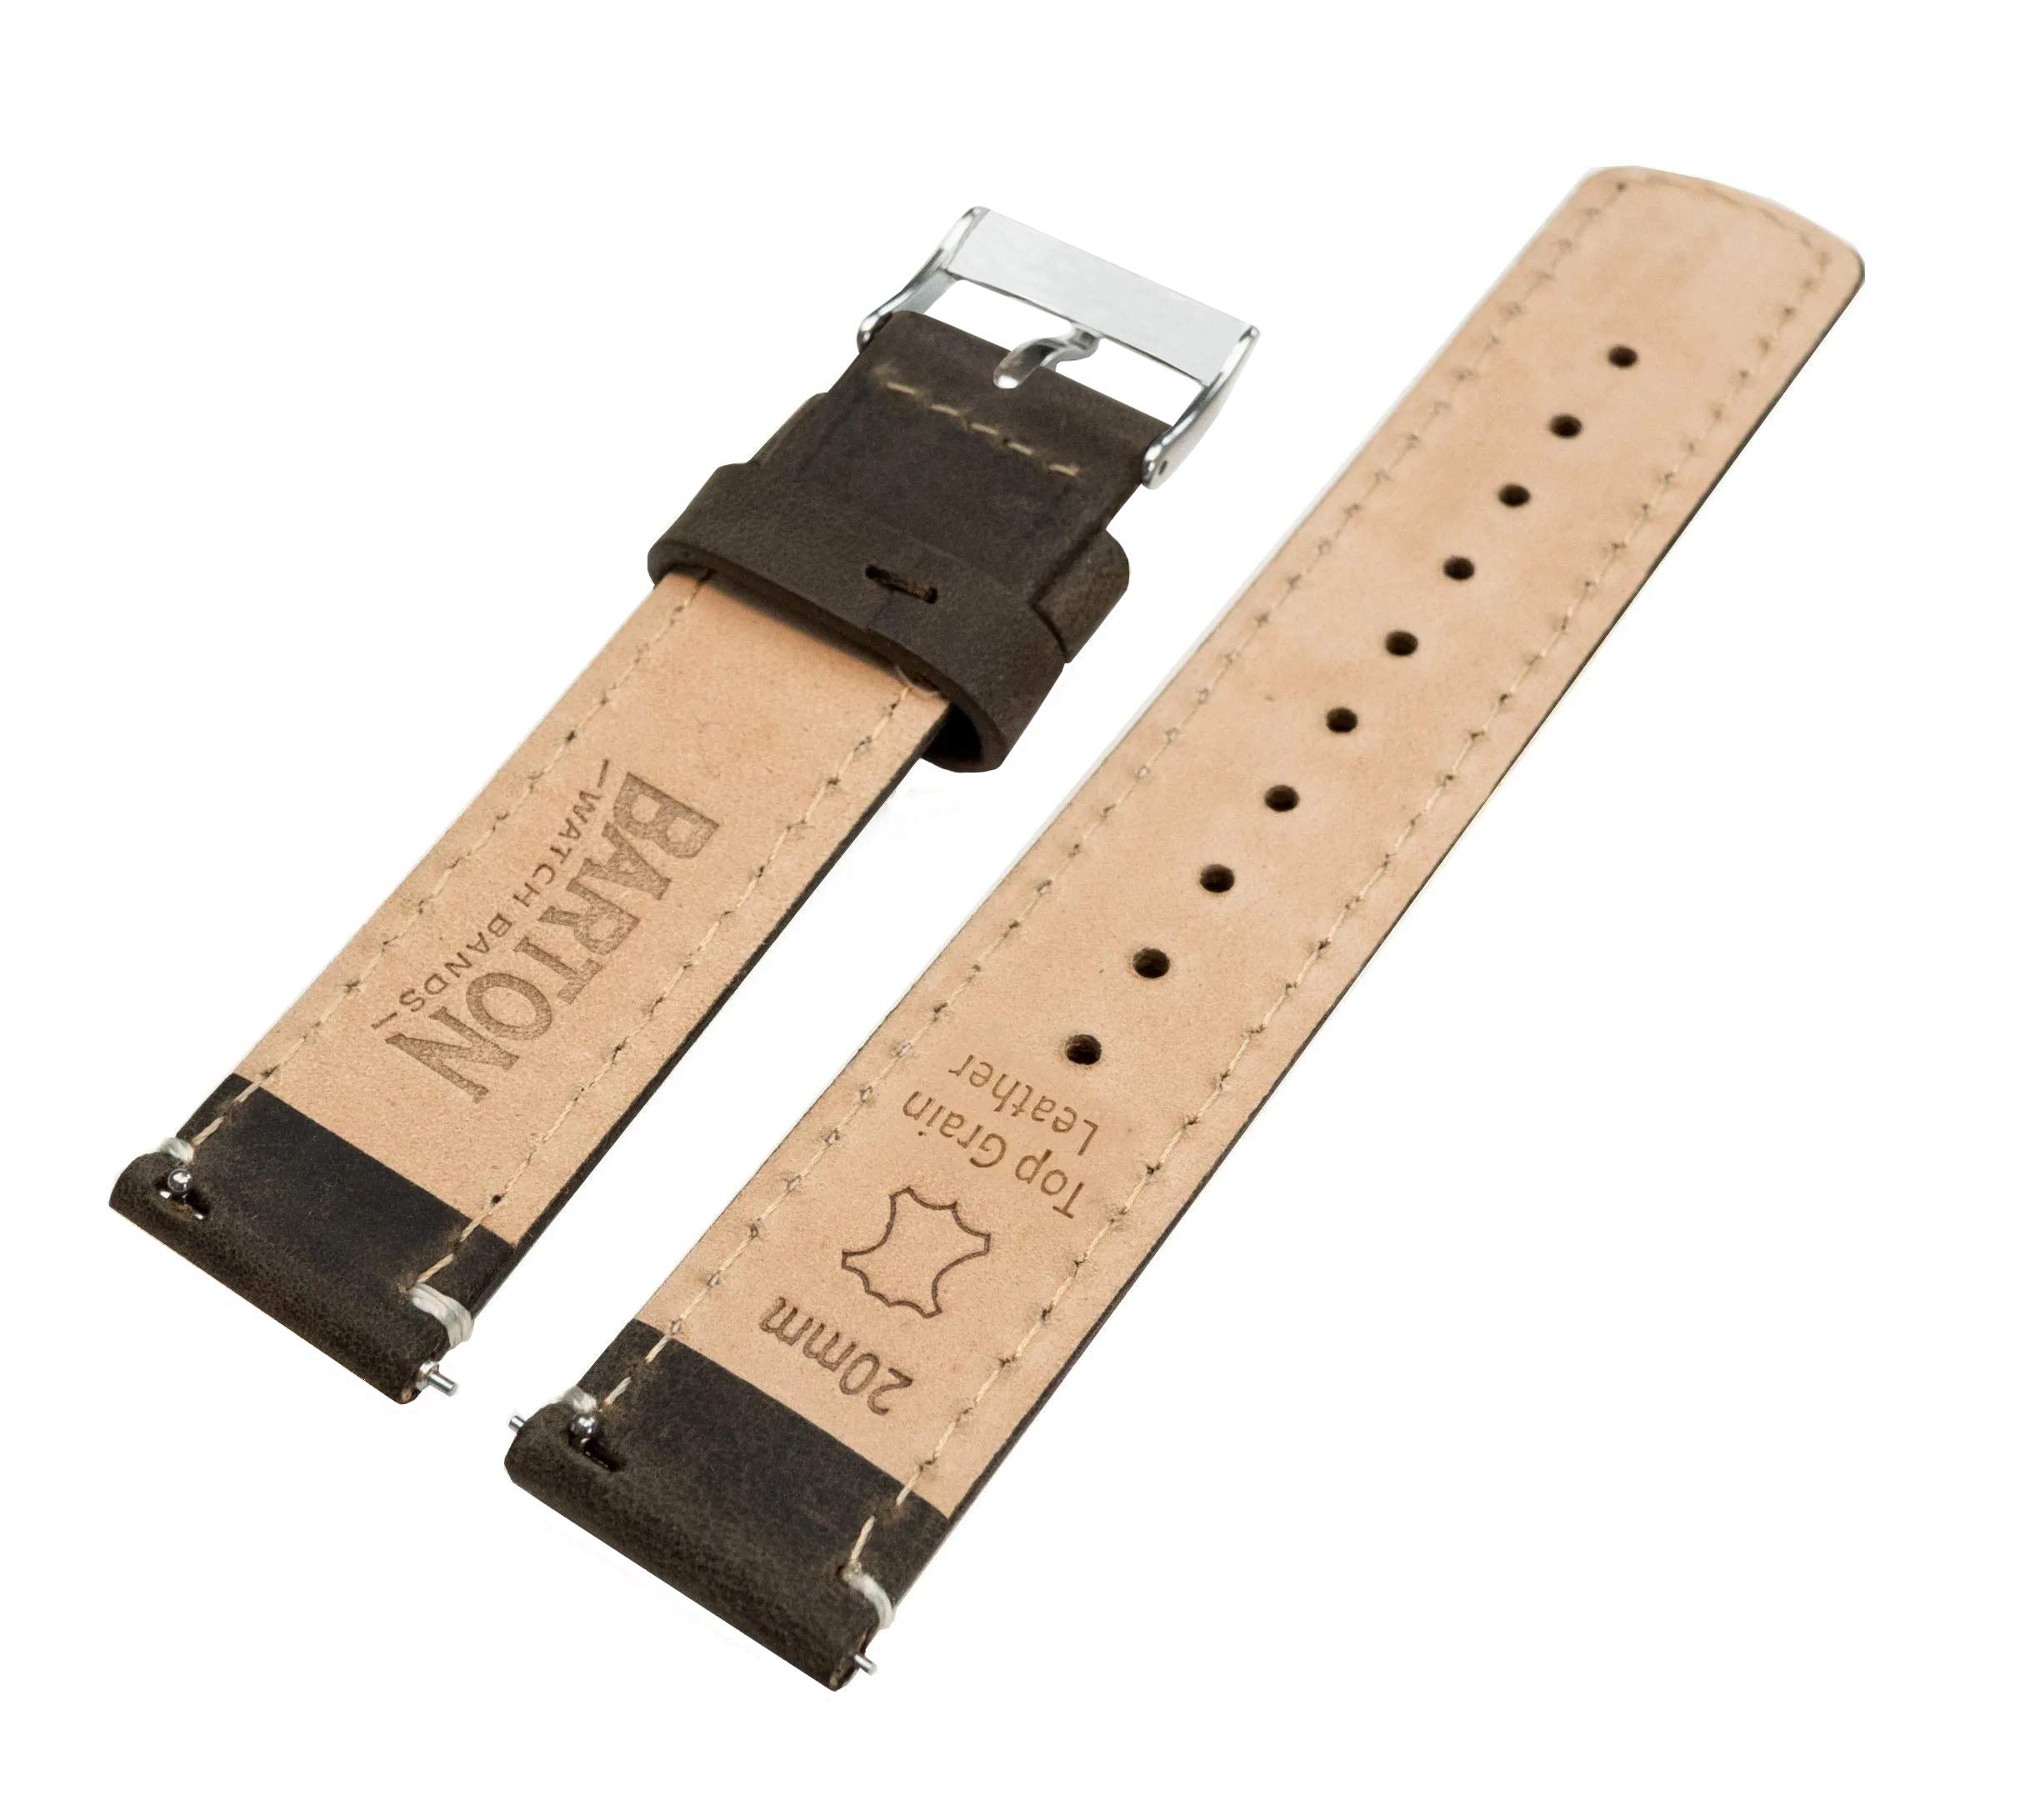 Barton Quick Release - Top Grain Leather Watch Band Strap - Choice of Width - 16mm, 18mm, 19mm, 20mm, 21mm 22mm, 23mm or 24mm